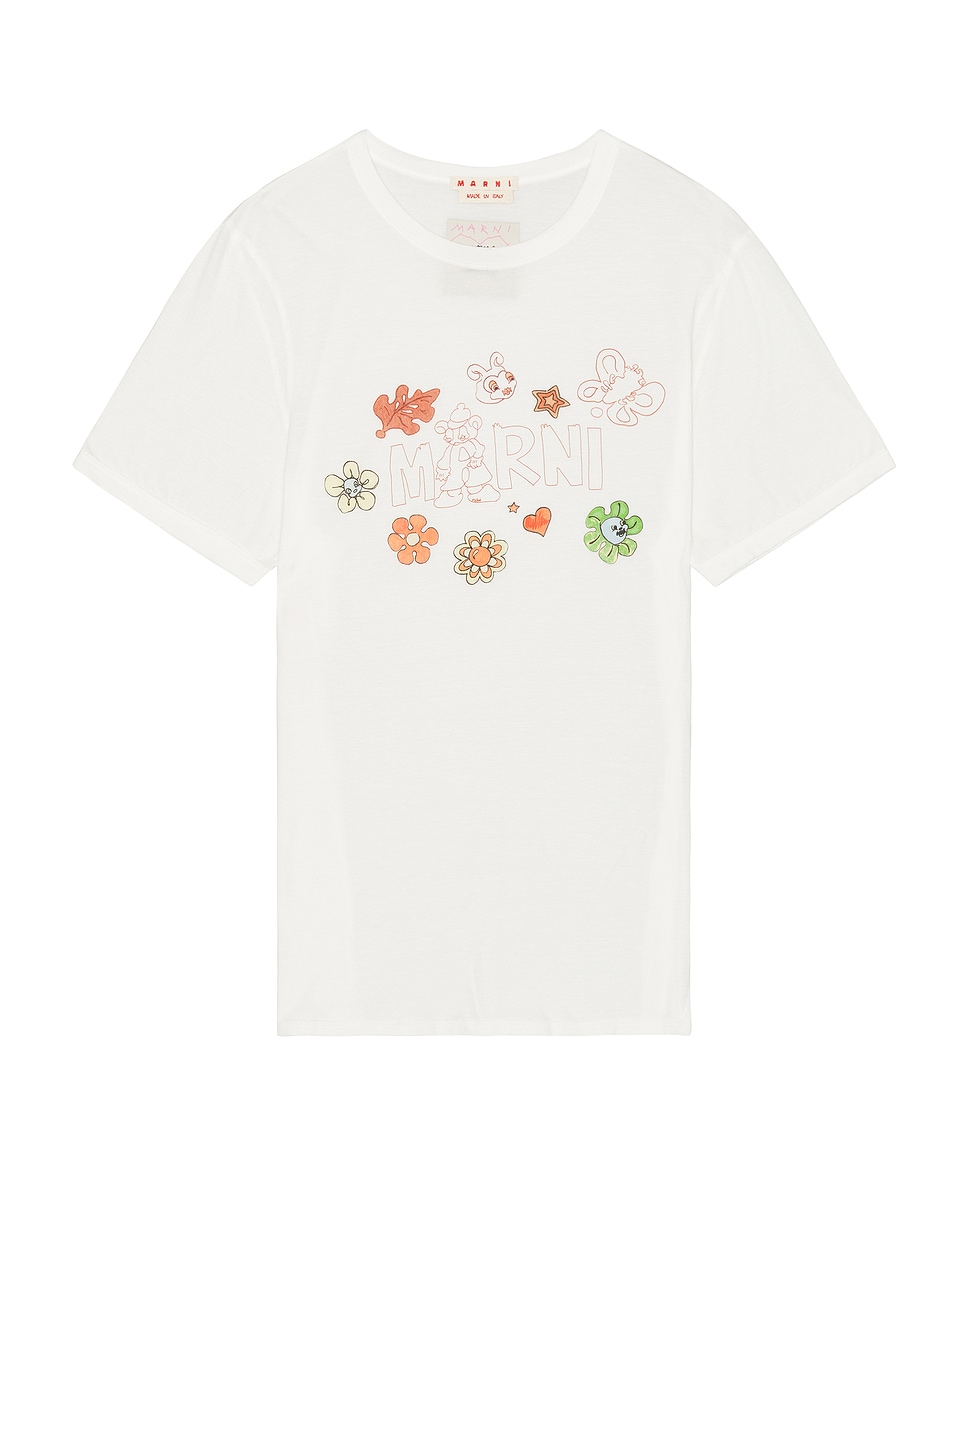 Marni X Paloma Funky Charm Explosion T-shirt In Lily White